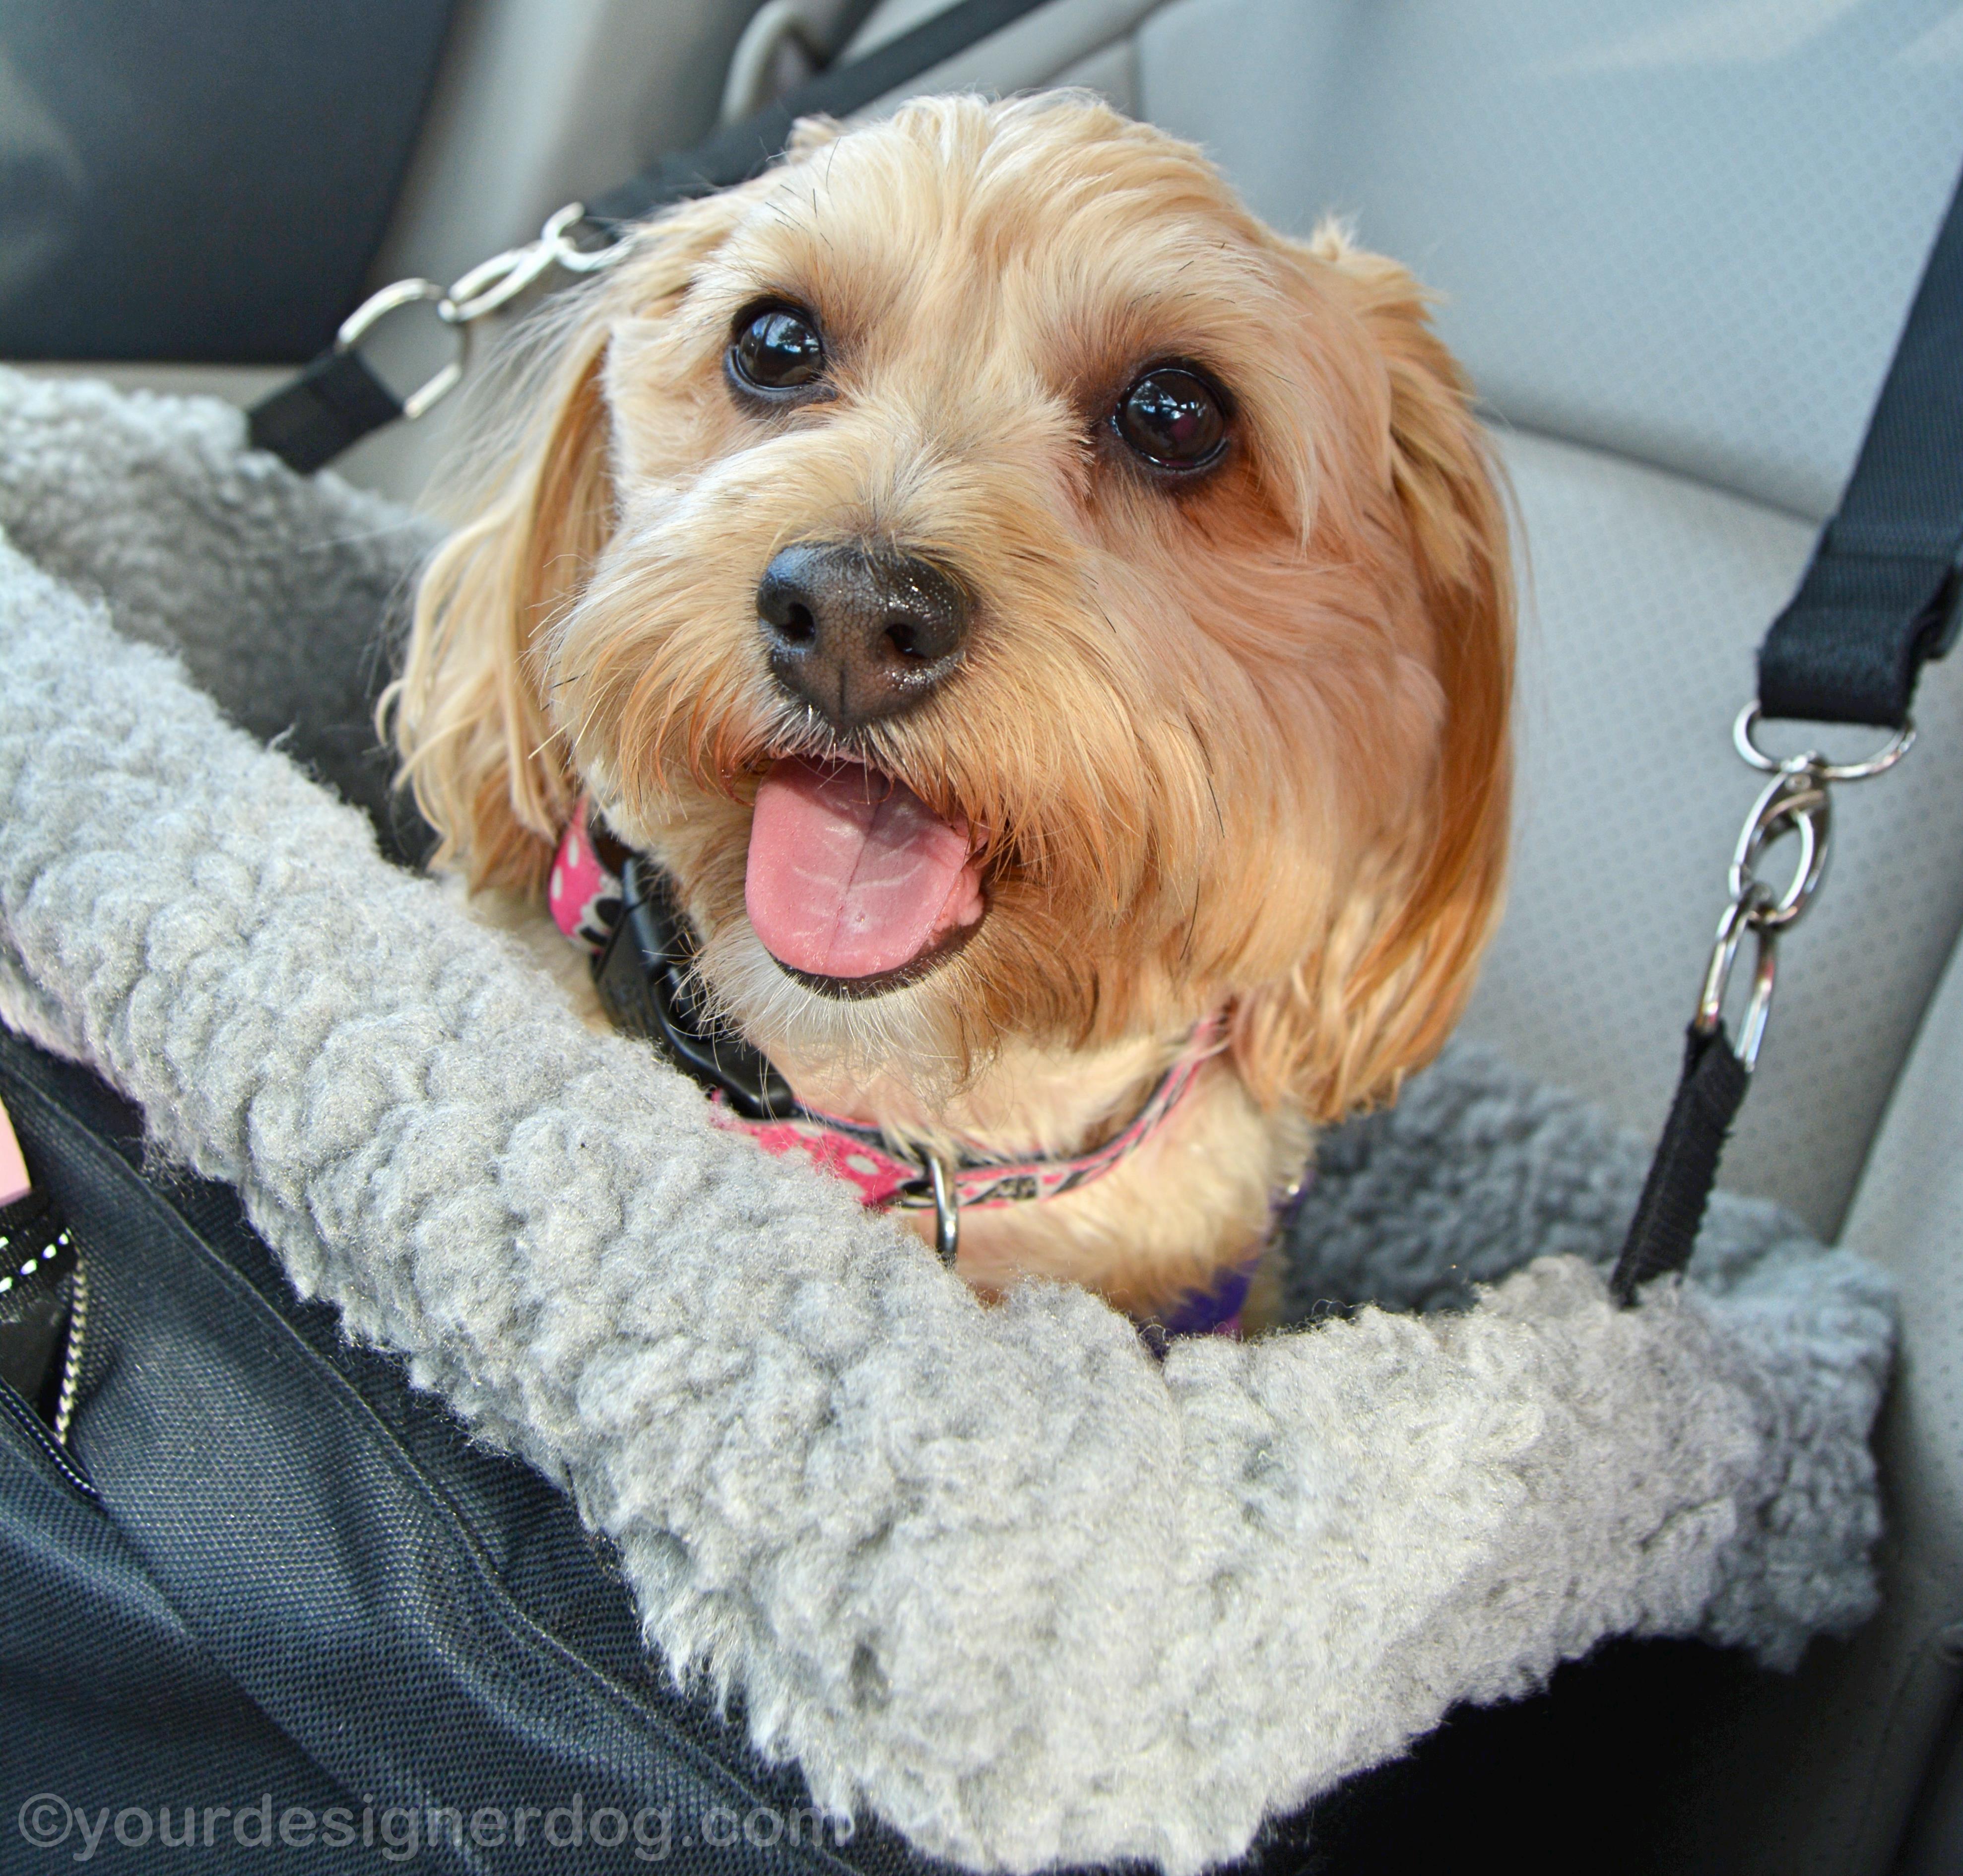 dogs, designer dogs, yorkipoo, yorkie poo, car seat, tongue out